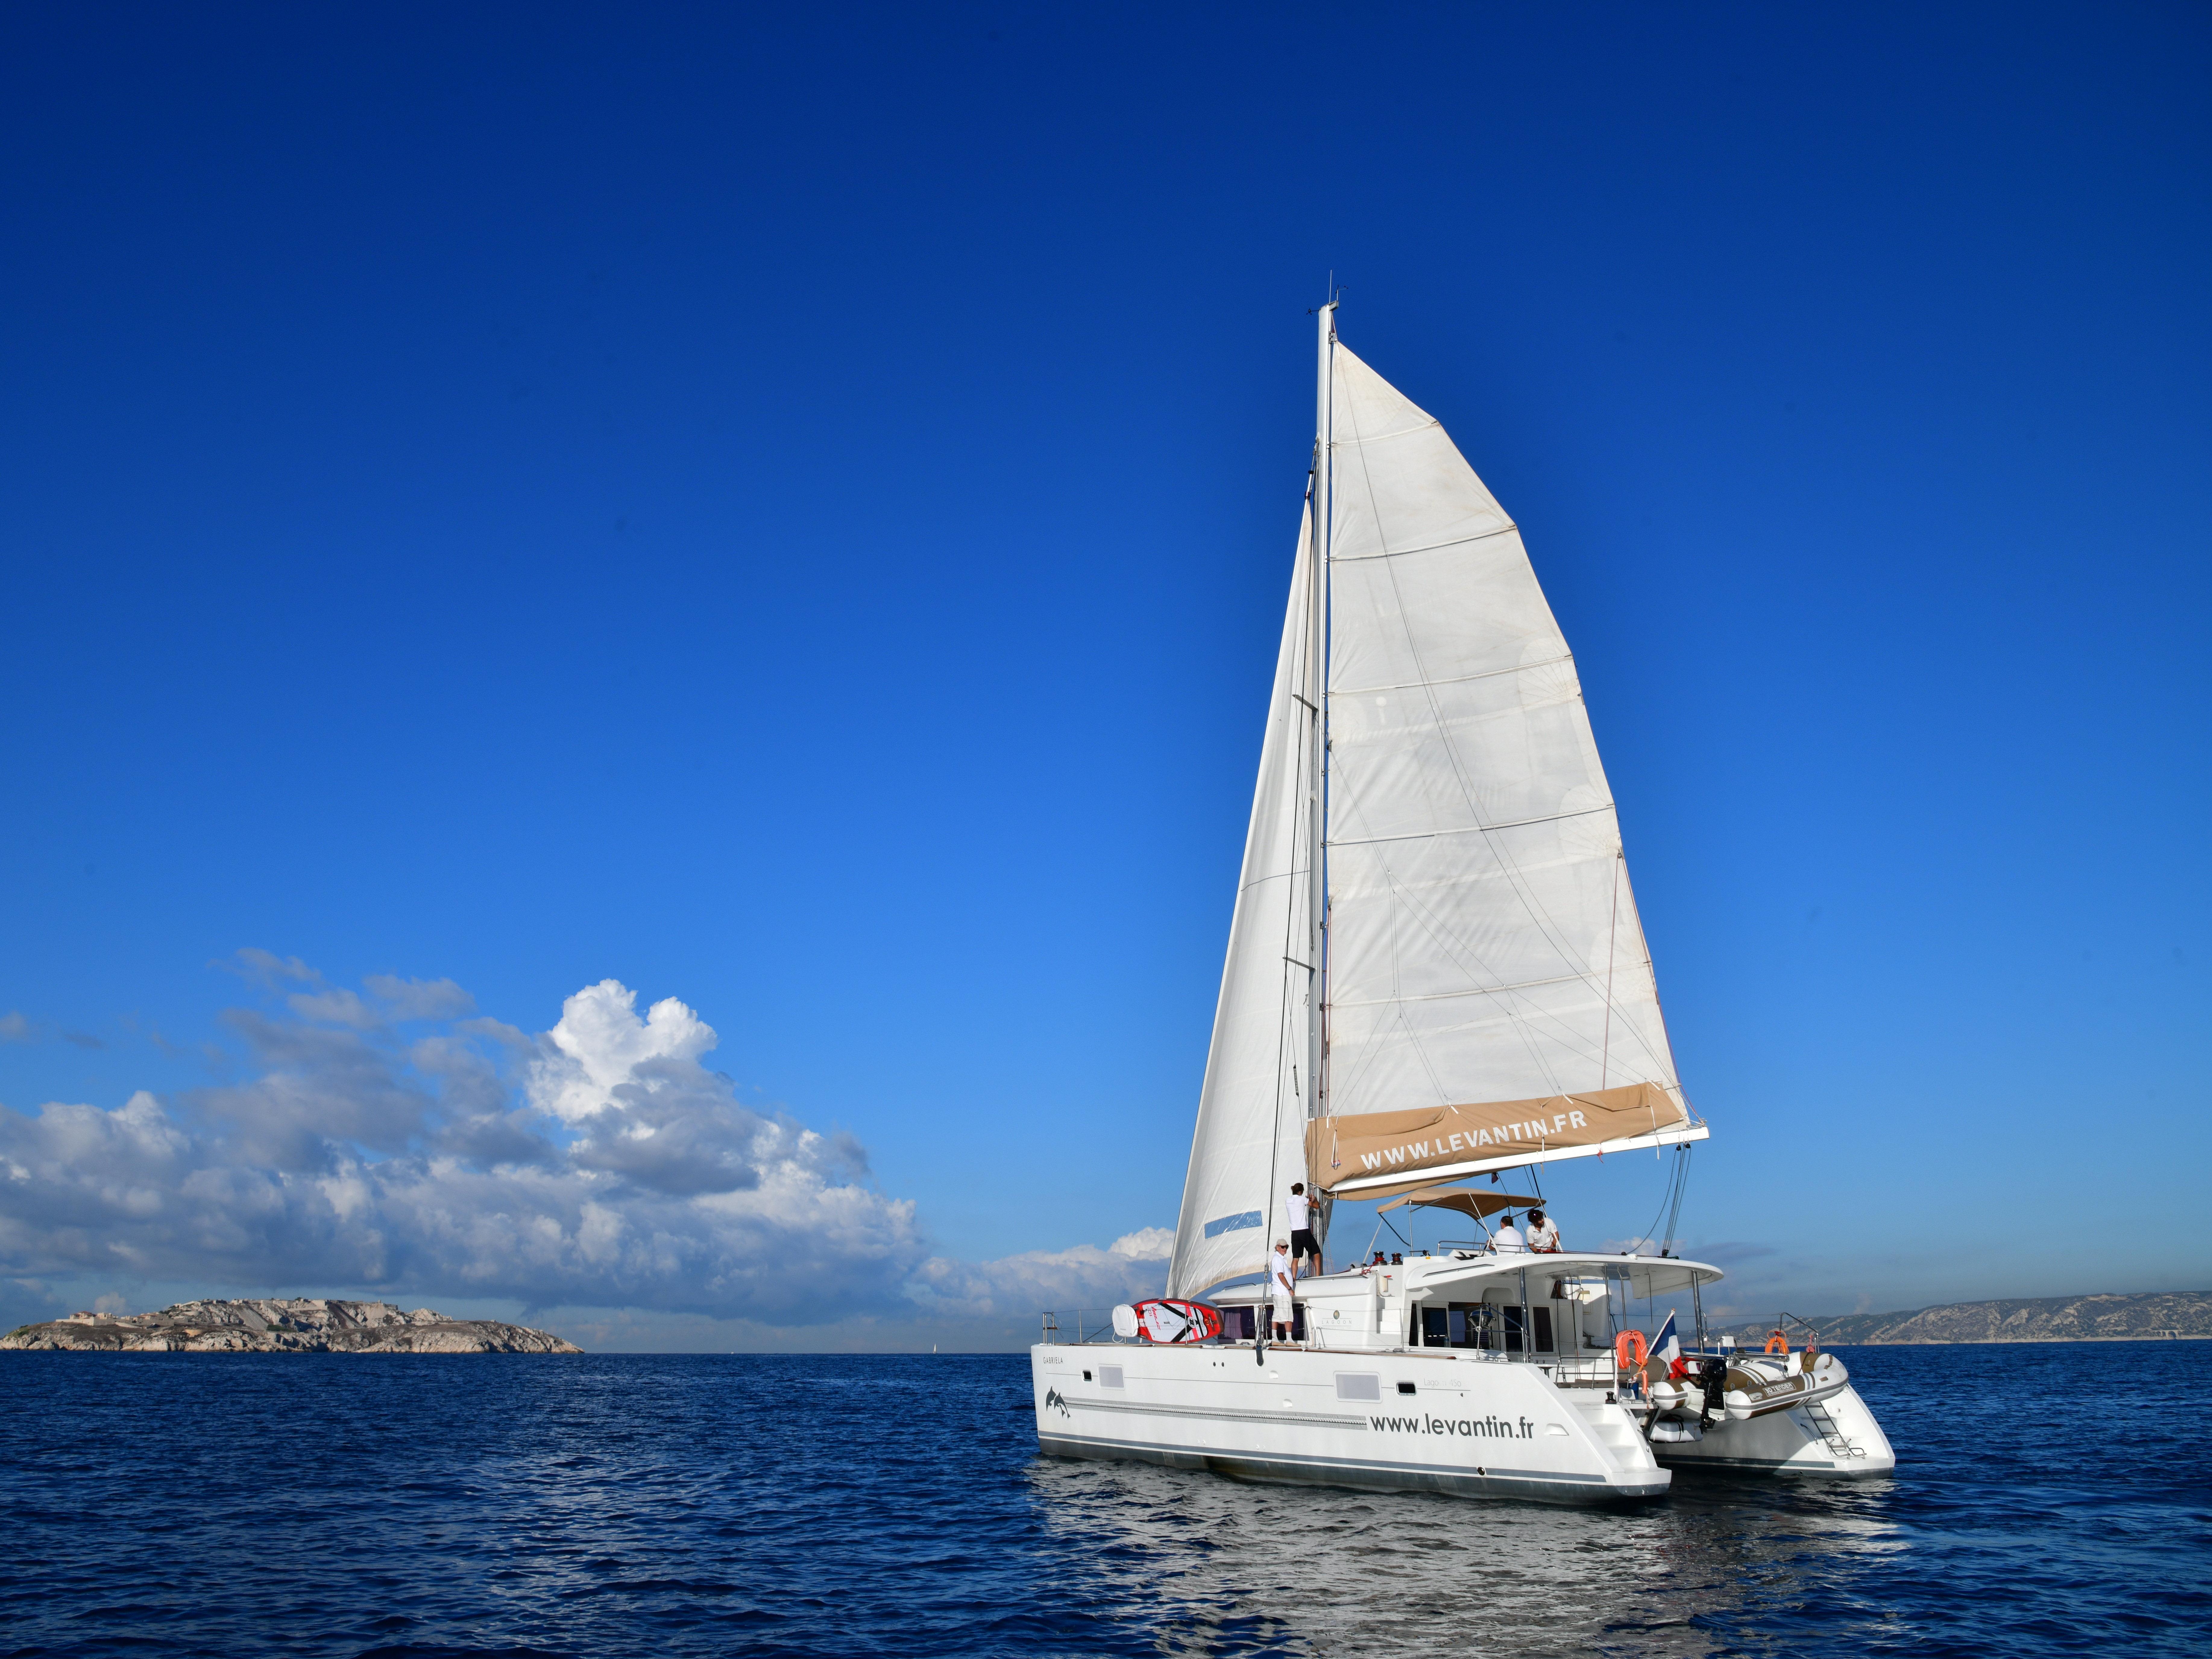 Lagoon 450 - Yacht Charter Marseille & Boat hire in France French Riviera Marseille Marseille Marina Vieux Port 1